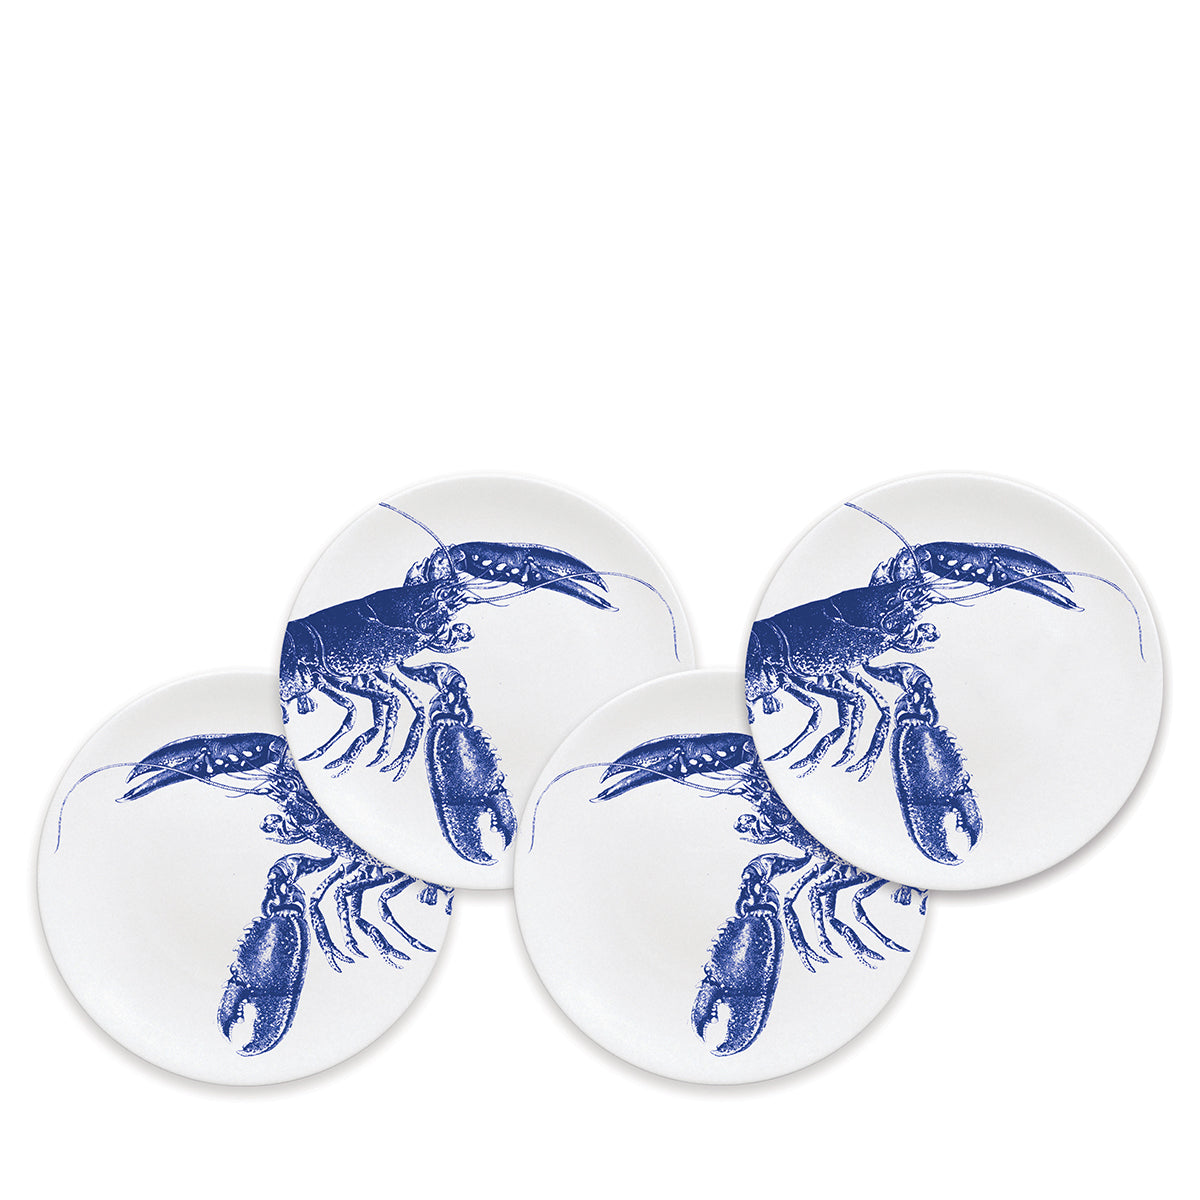 Four white heirloom-quality dinnerware plates each feature a blue lobster illustrated in the center. These Lobster Small Plates by Caskata Artisanal Home overlap slightly, beautifully displaying the entire lobster design, reminiscent of New England&#39;s coast.